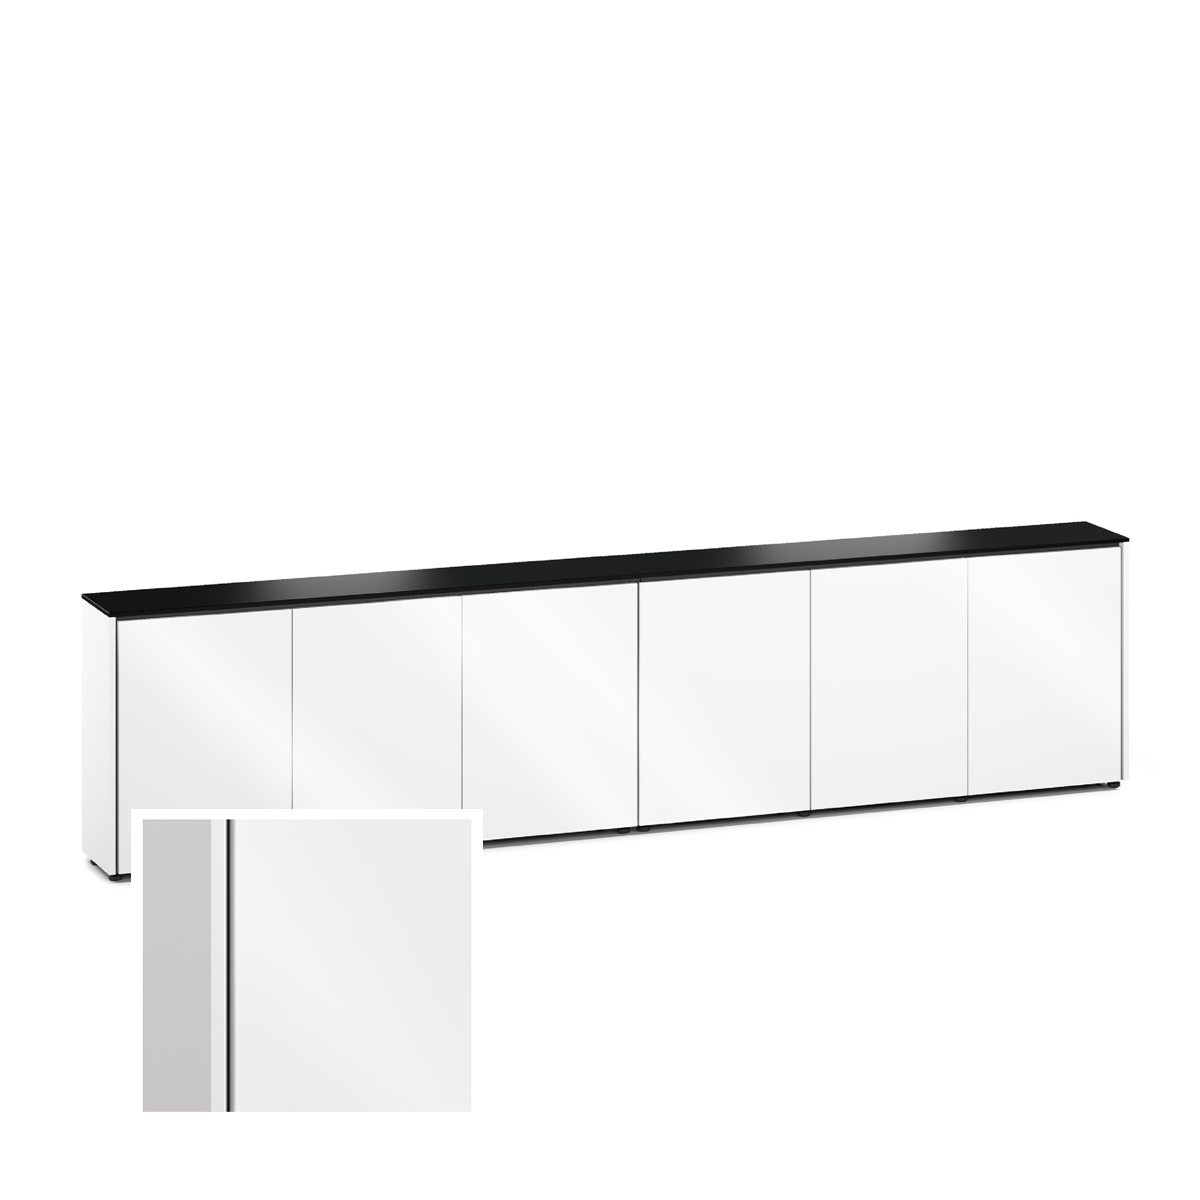 D1/367A/MM/GW/WH 6 Bay Low-Profile, Wall Cabinet, Miami- Gloss White / White Solid Surface